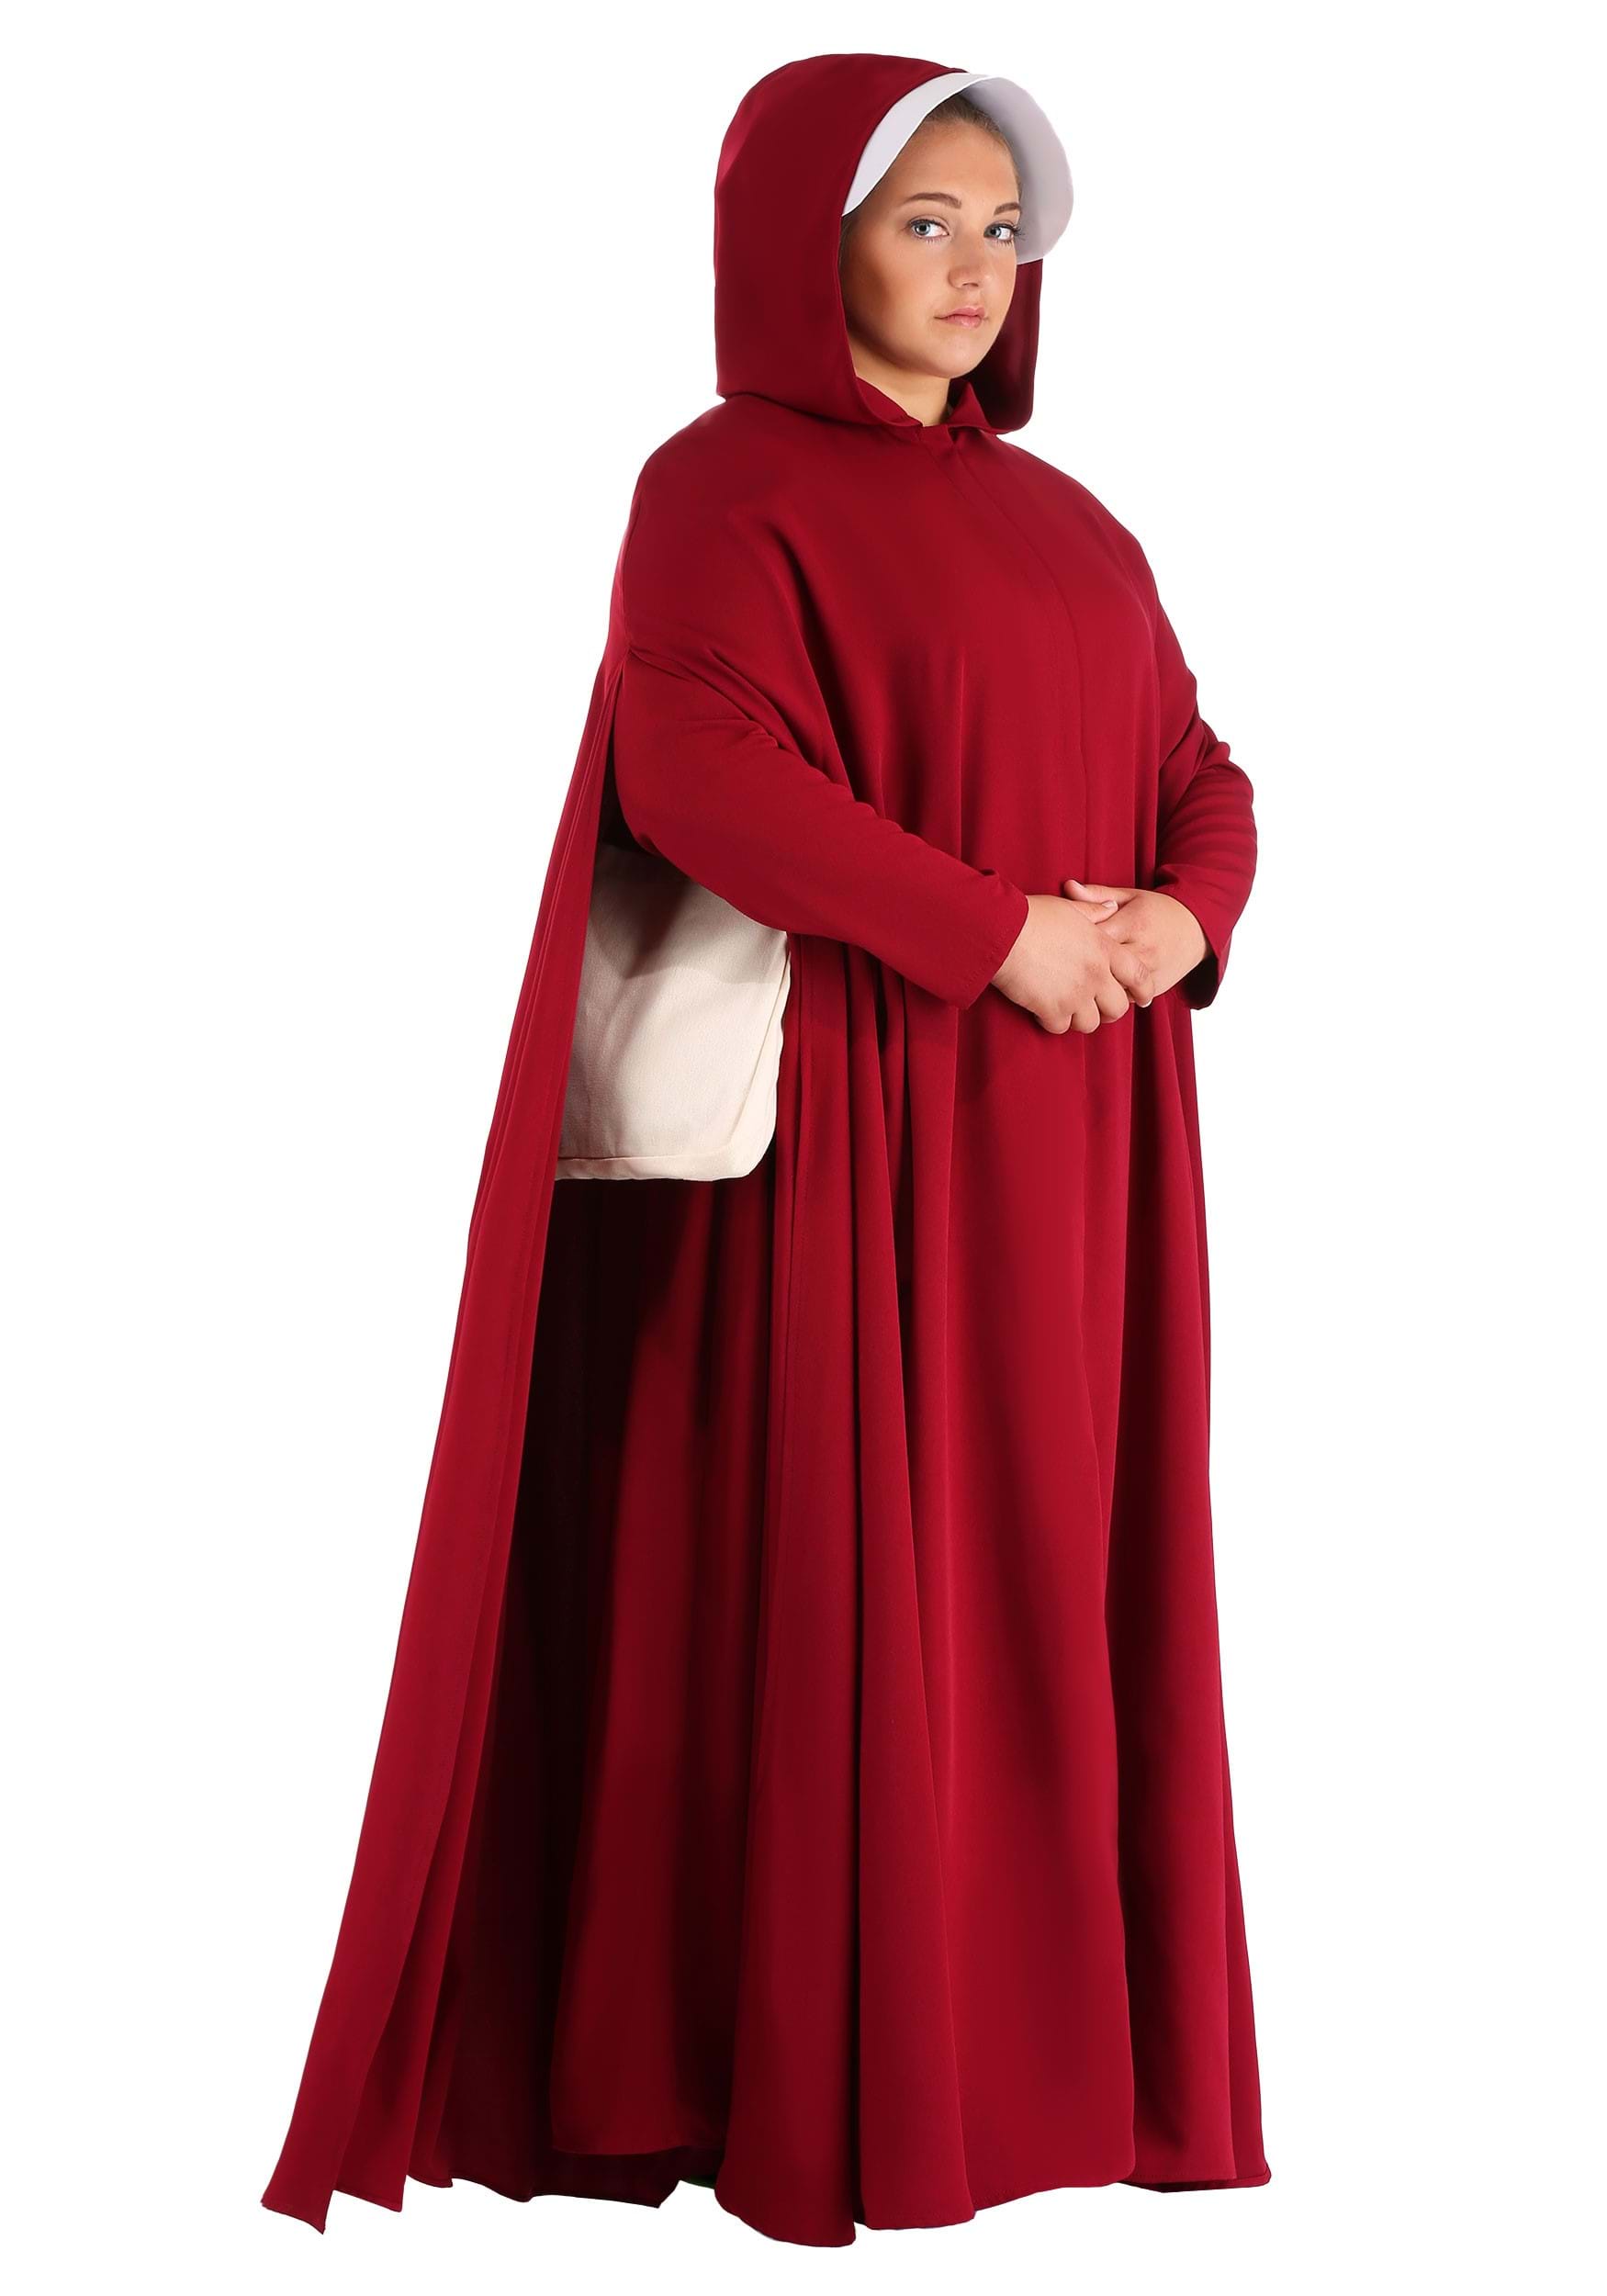 Handmaid's Tale Deluxe Plus Size Costume For Women